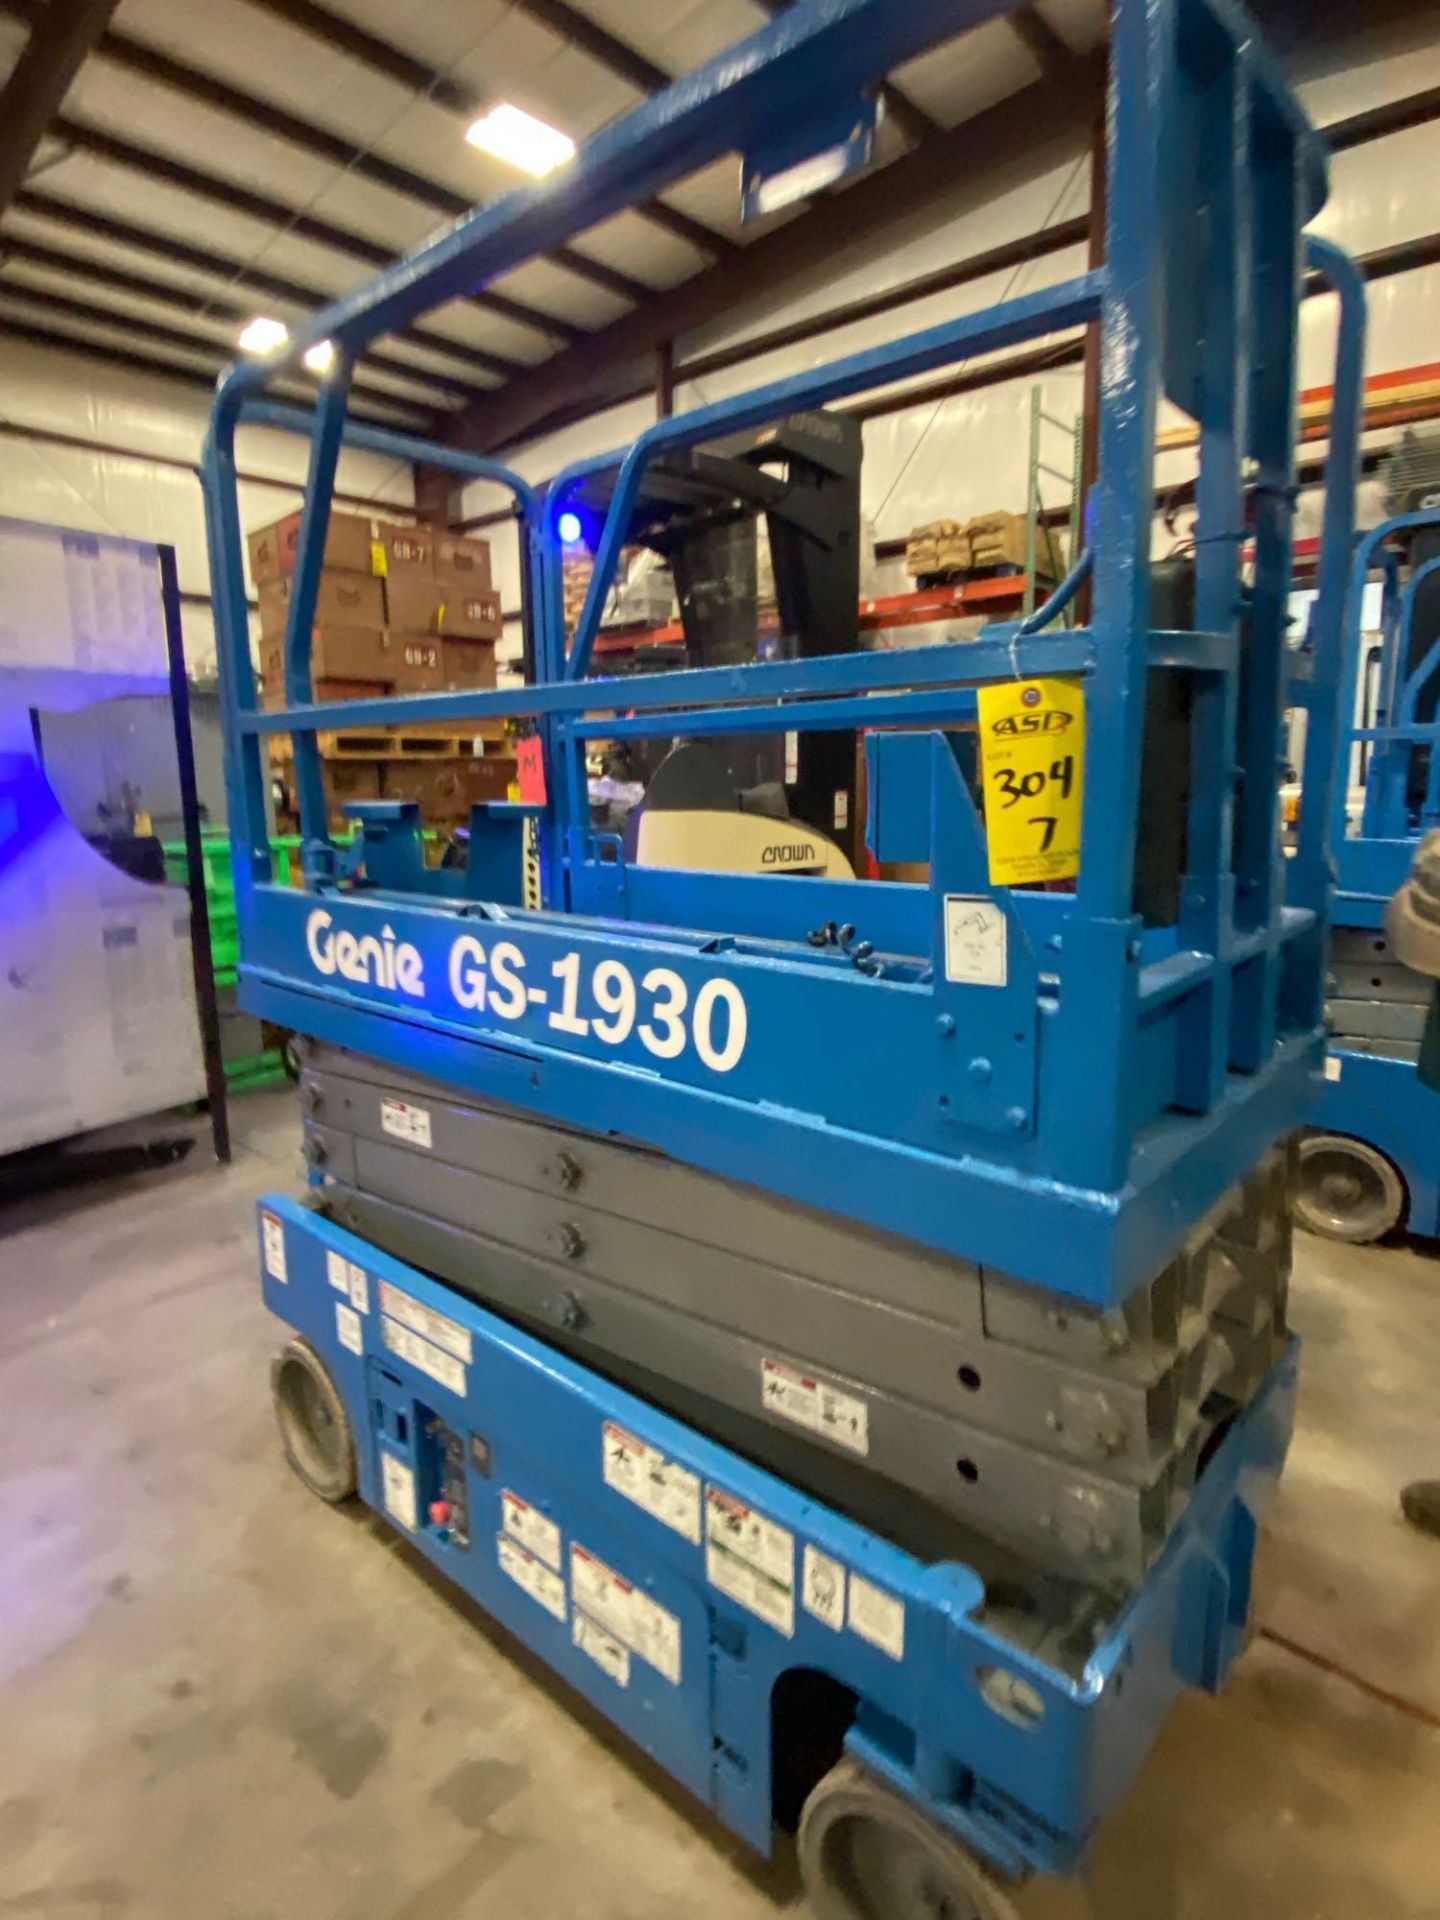 GENIE GS-1930 ELECTRIC SCISSOR LIFT, SELF PROPELLED, 19' PLATFORM HEIGHT, BUILT IN BATTERY CHARGER,